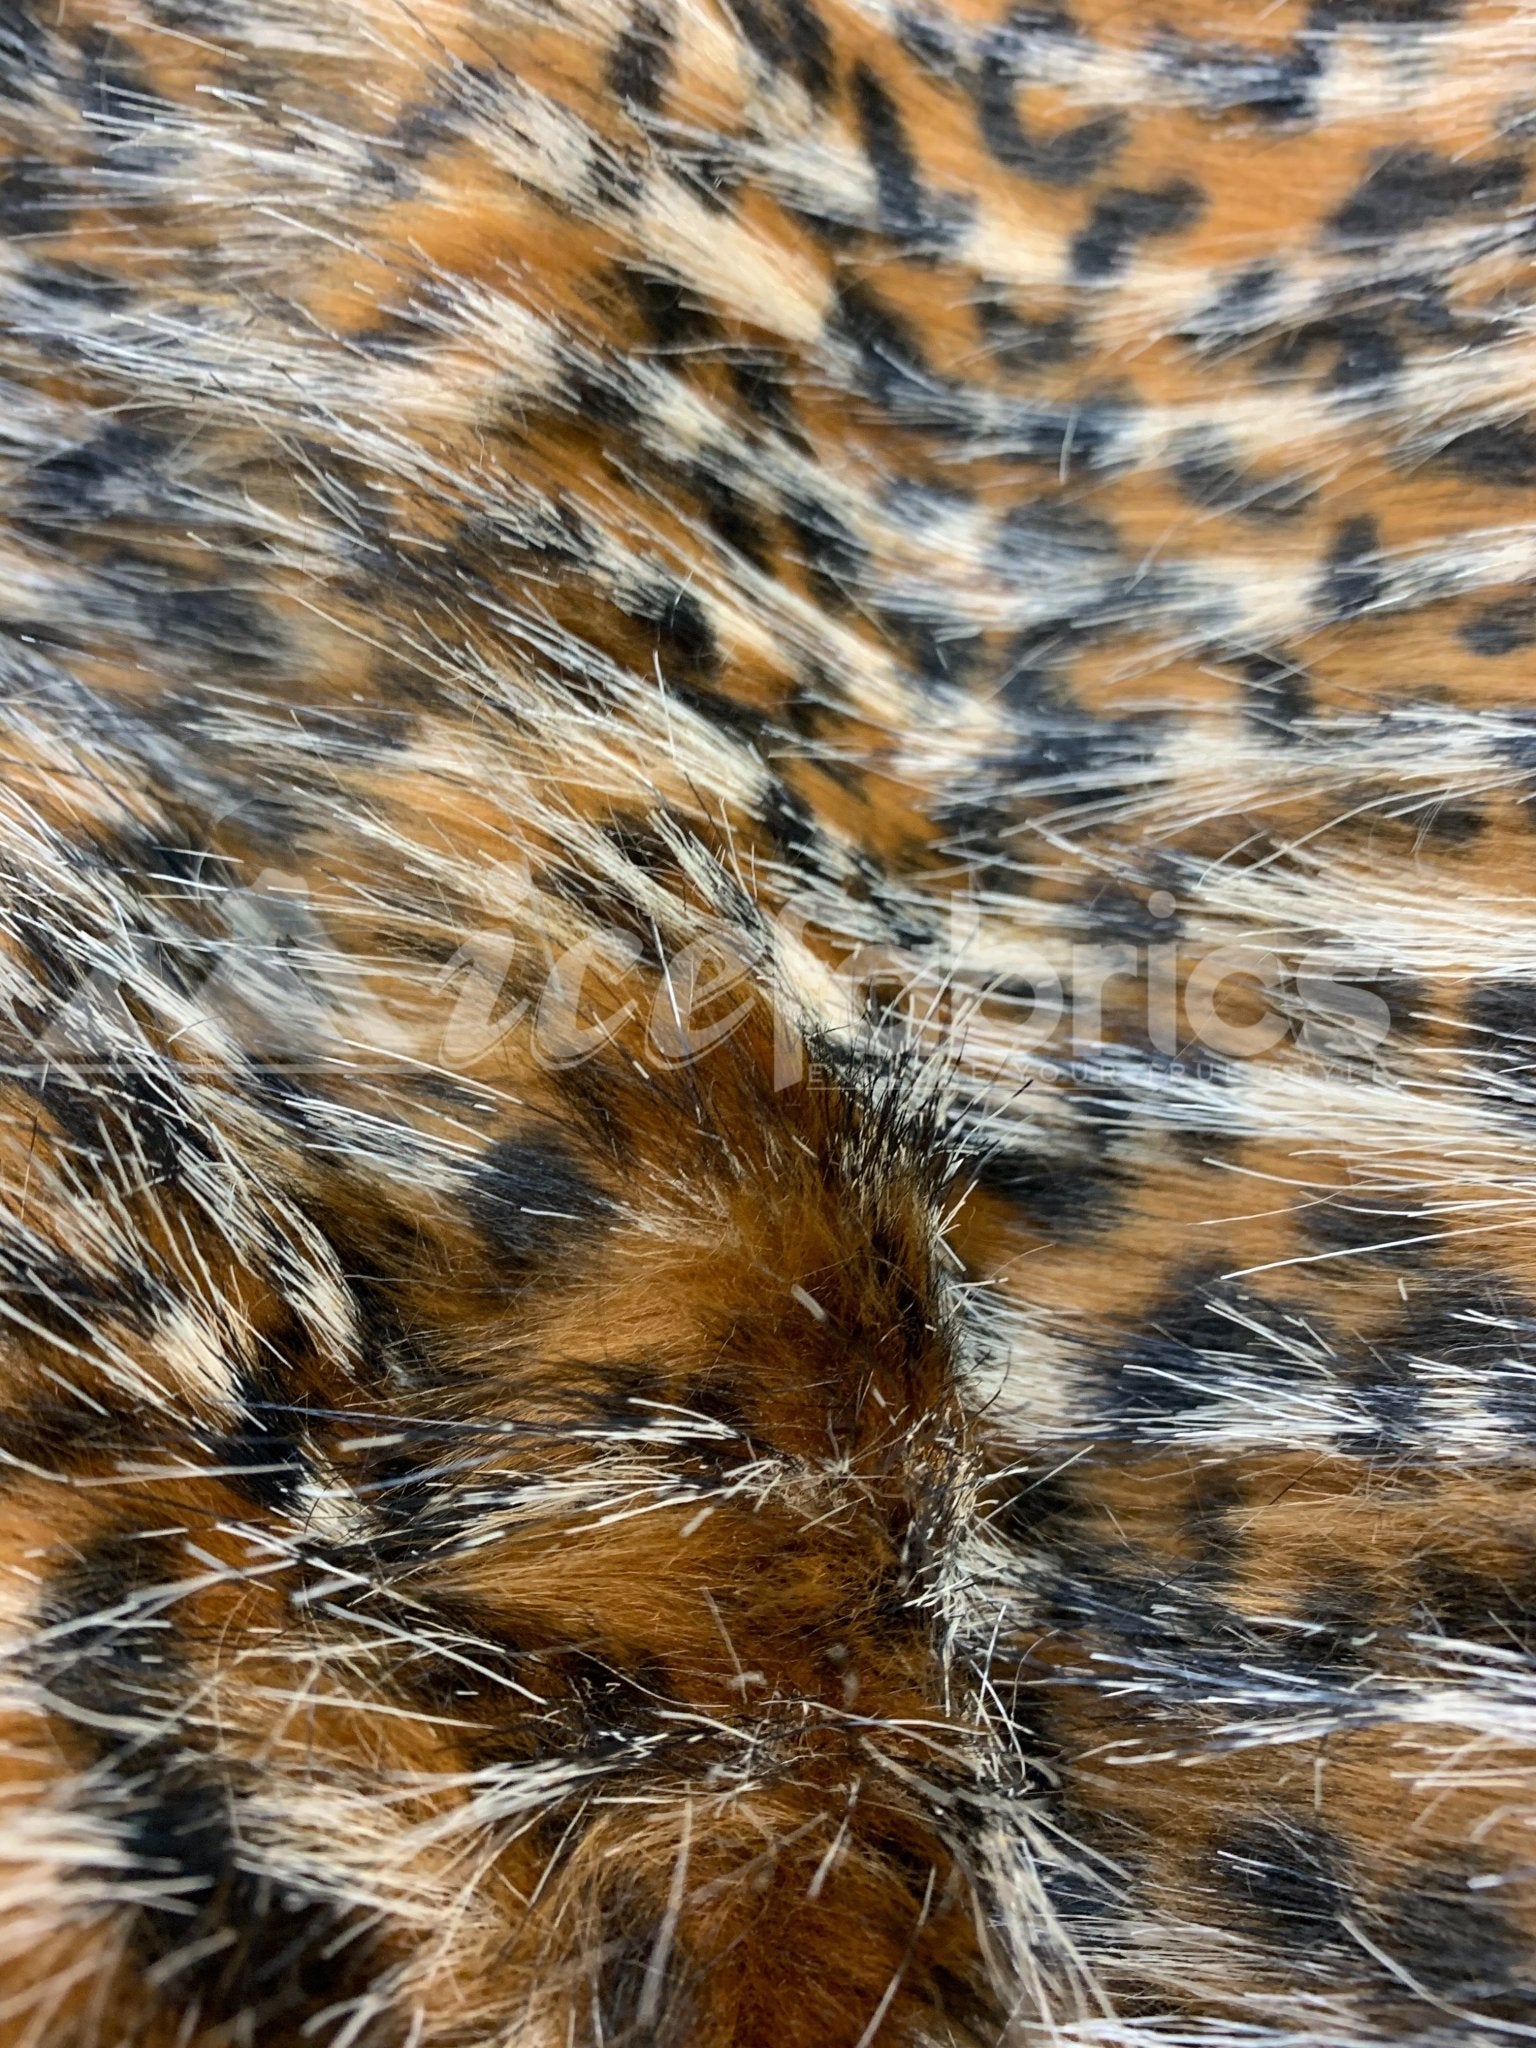 Long Pile Gold Leopard Faux Fur Fabric Material By The YardICEFABRICICE FABRICSBy The Yard (60 inches Wide)Long Pile Gold Leopard Faux Fur Fabric Material By The Yard ICEFABRIC